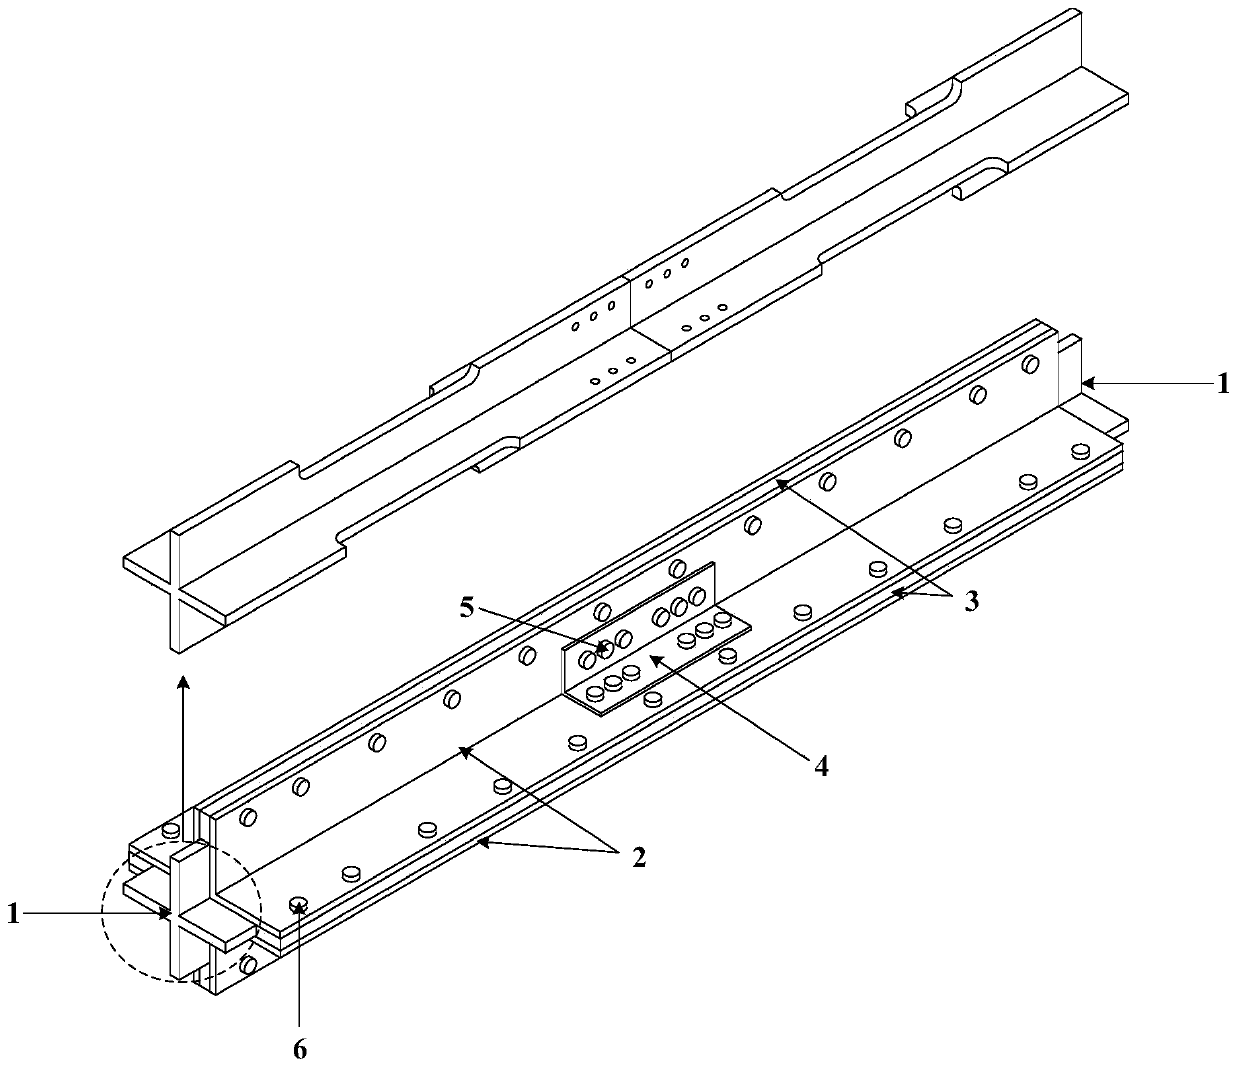 A four-angle steel fully assembled anti-buckling bracing that can directly replace the cross-shaped core